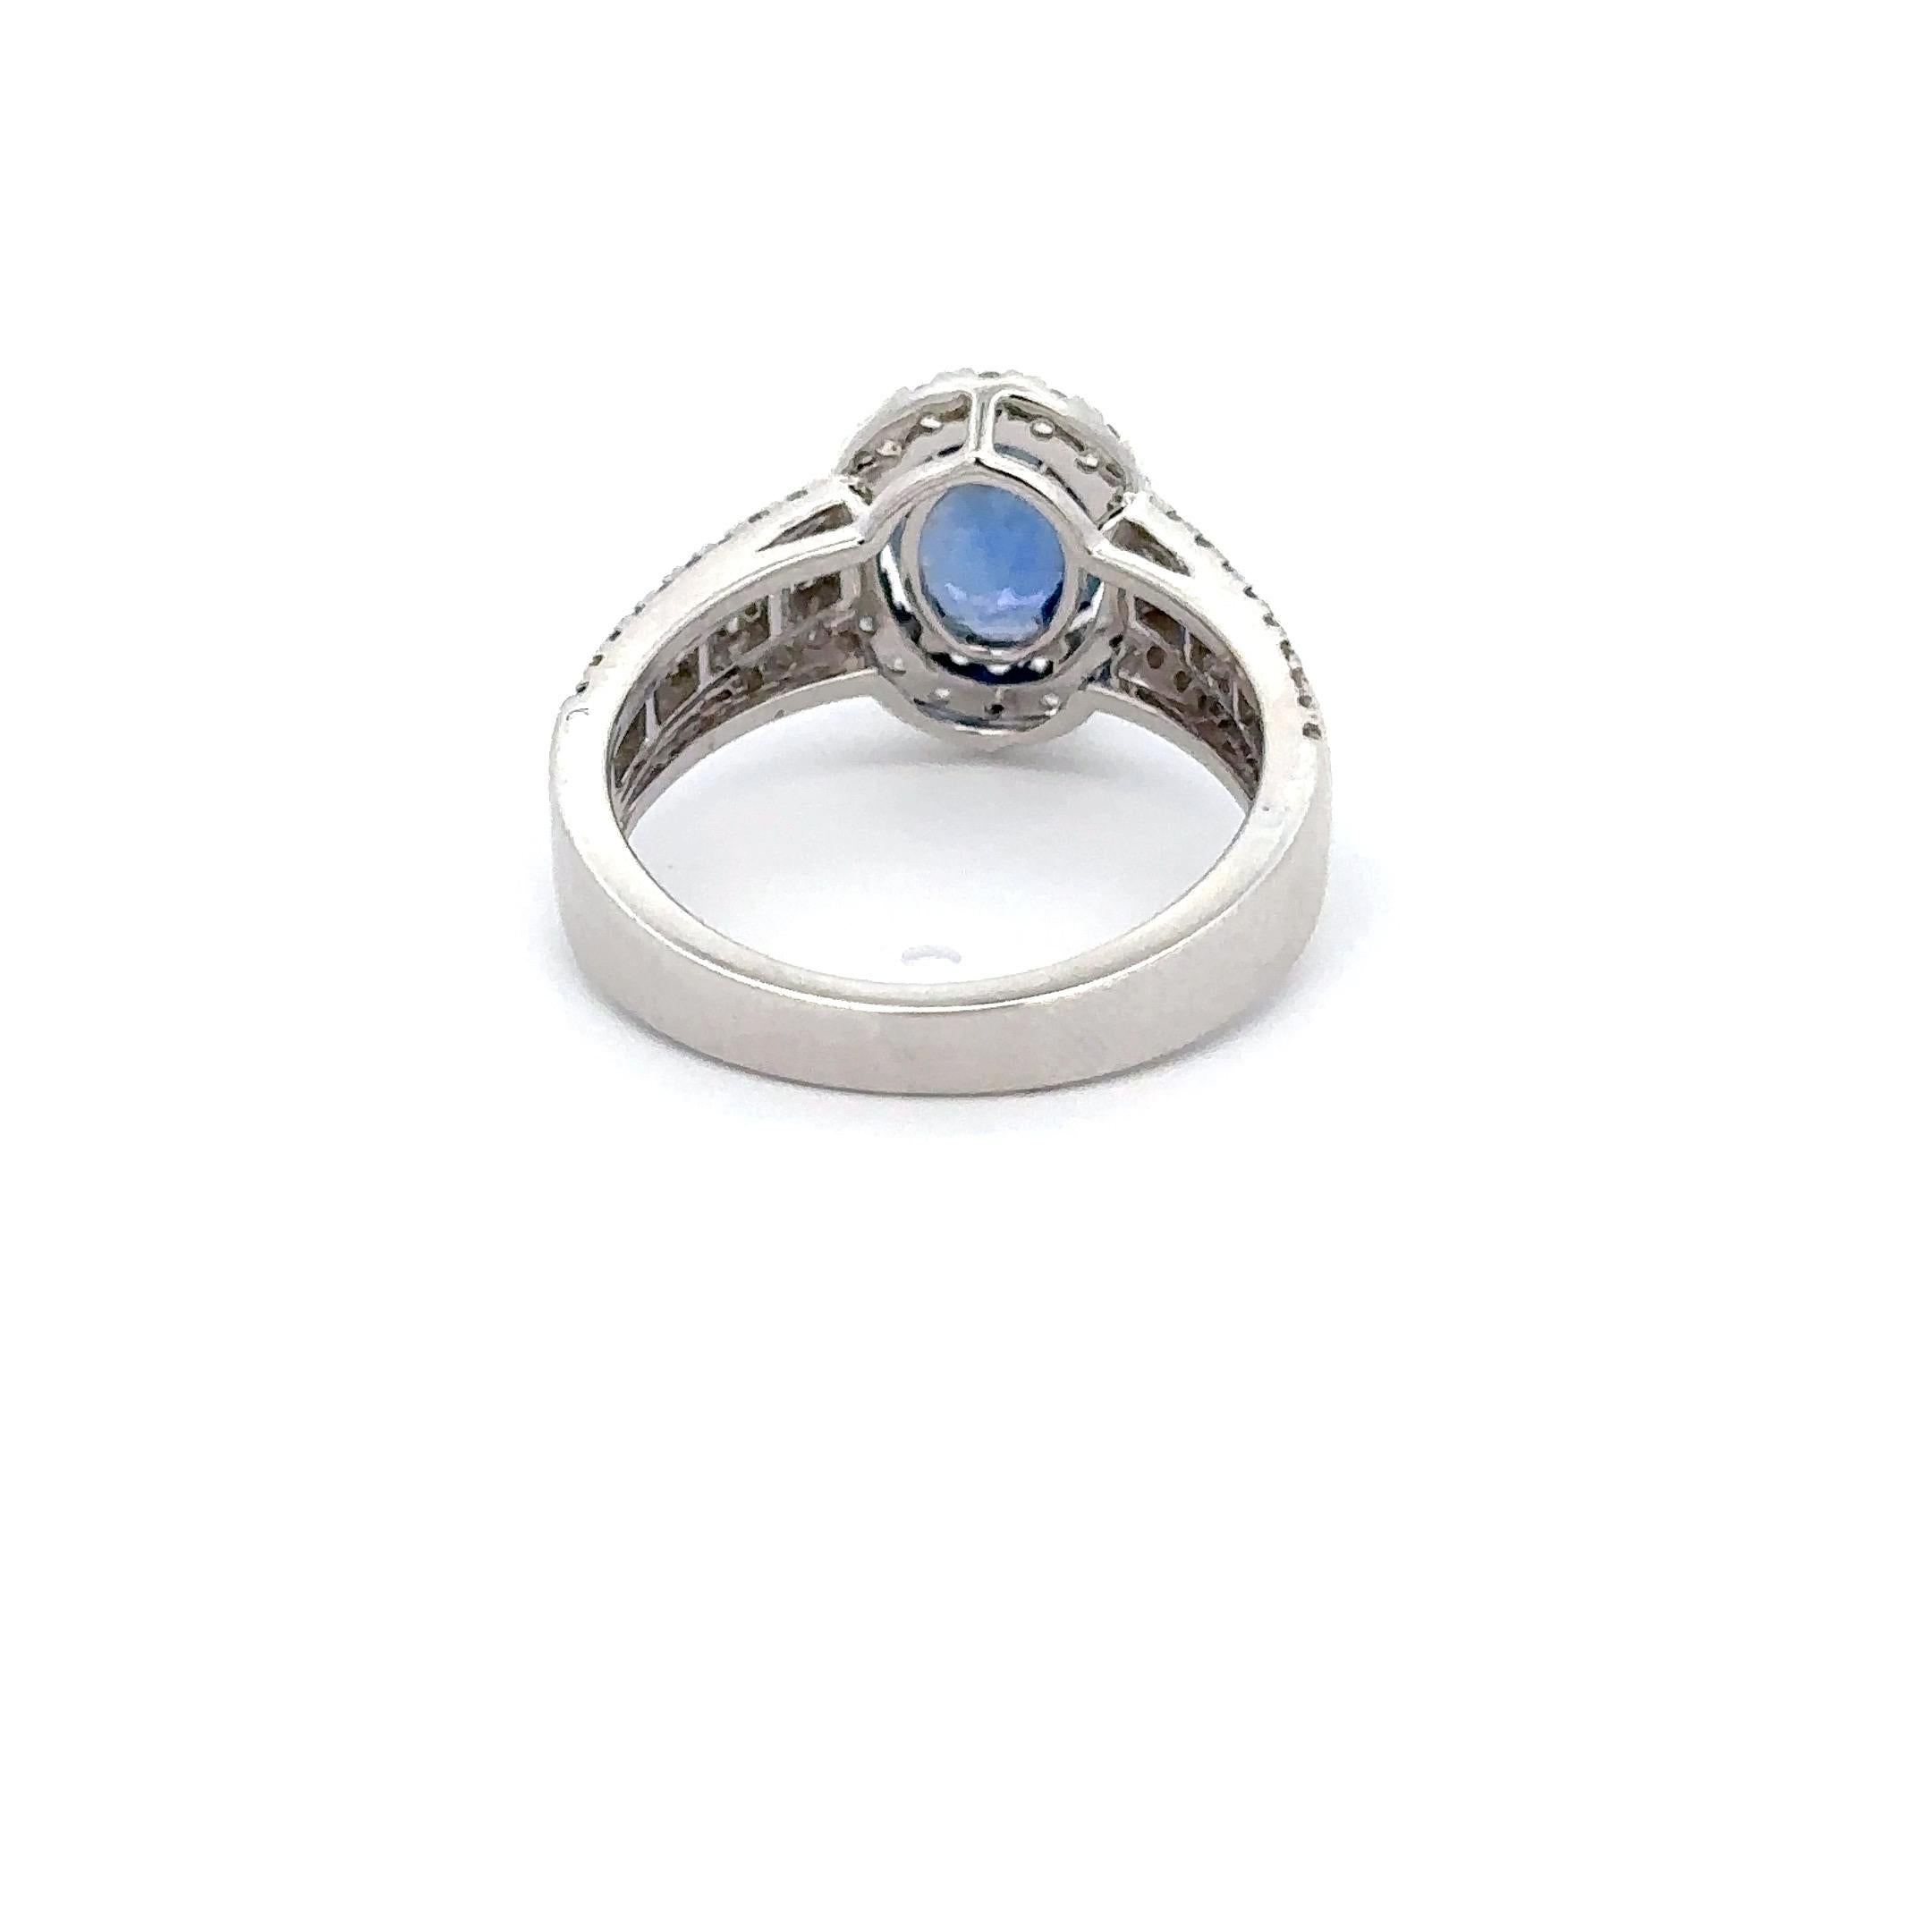 For Sale:  18k Solid White Gold Genuine Oval Blue Sapphire and Diamond Engagement Ring 7